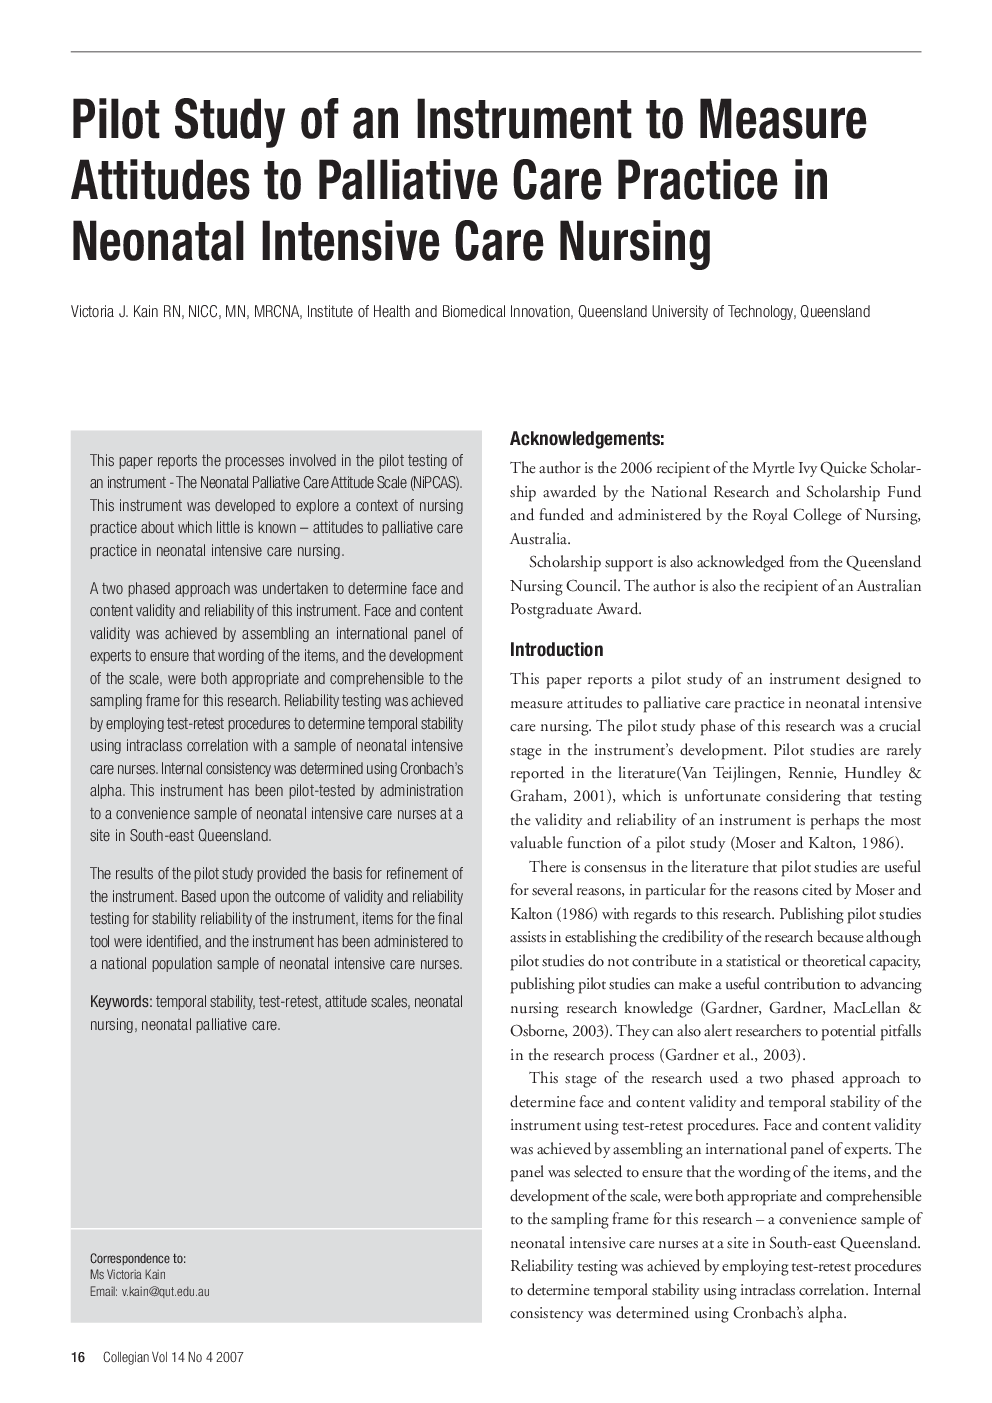 Pilot Study of an Instrument to Measure Attitudes to Palliative Care Practice in Neonatal Intensive Care Nursing